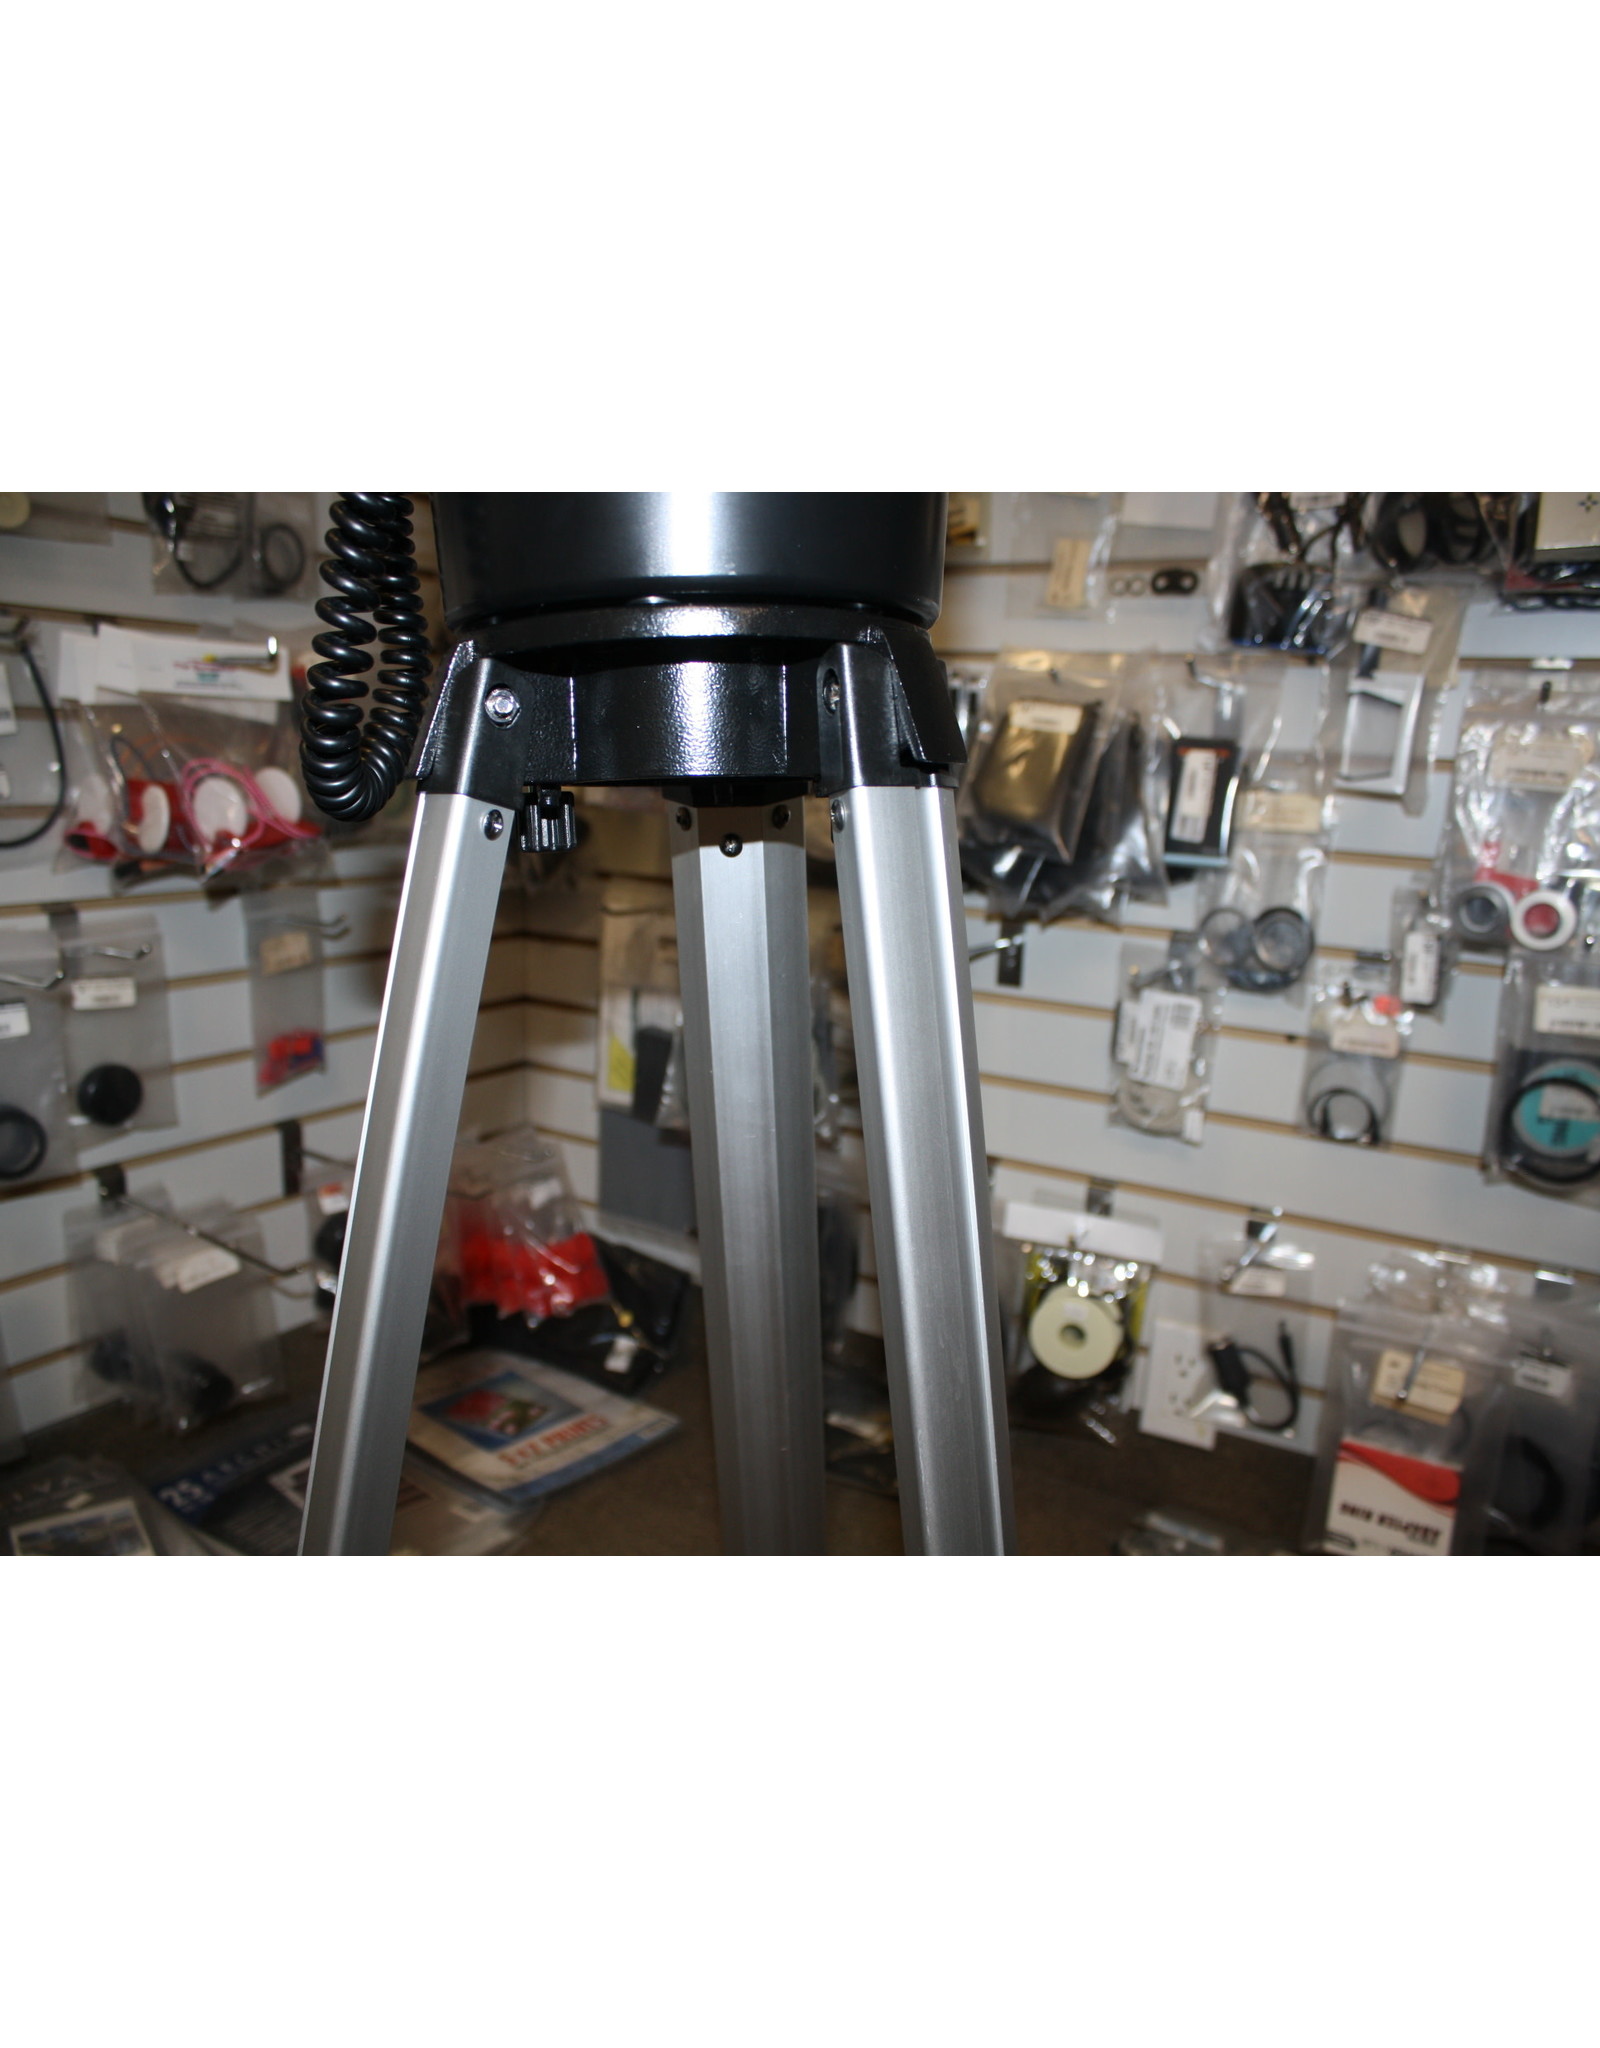 Meade Meade ETX70 Goto Computerized Telescope with Tripod and Cases (Pre-owned)